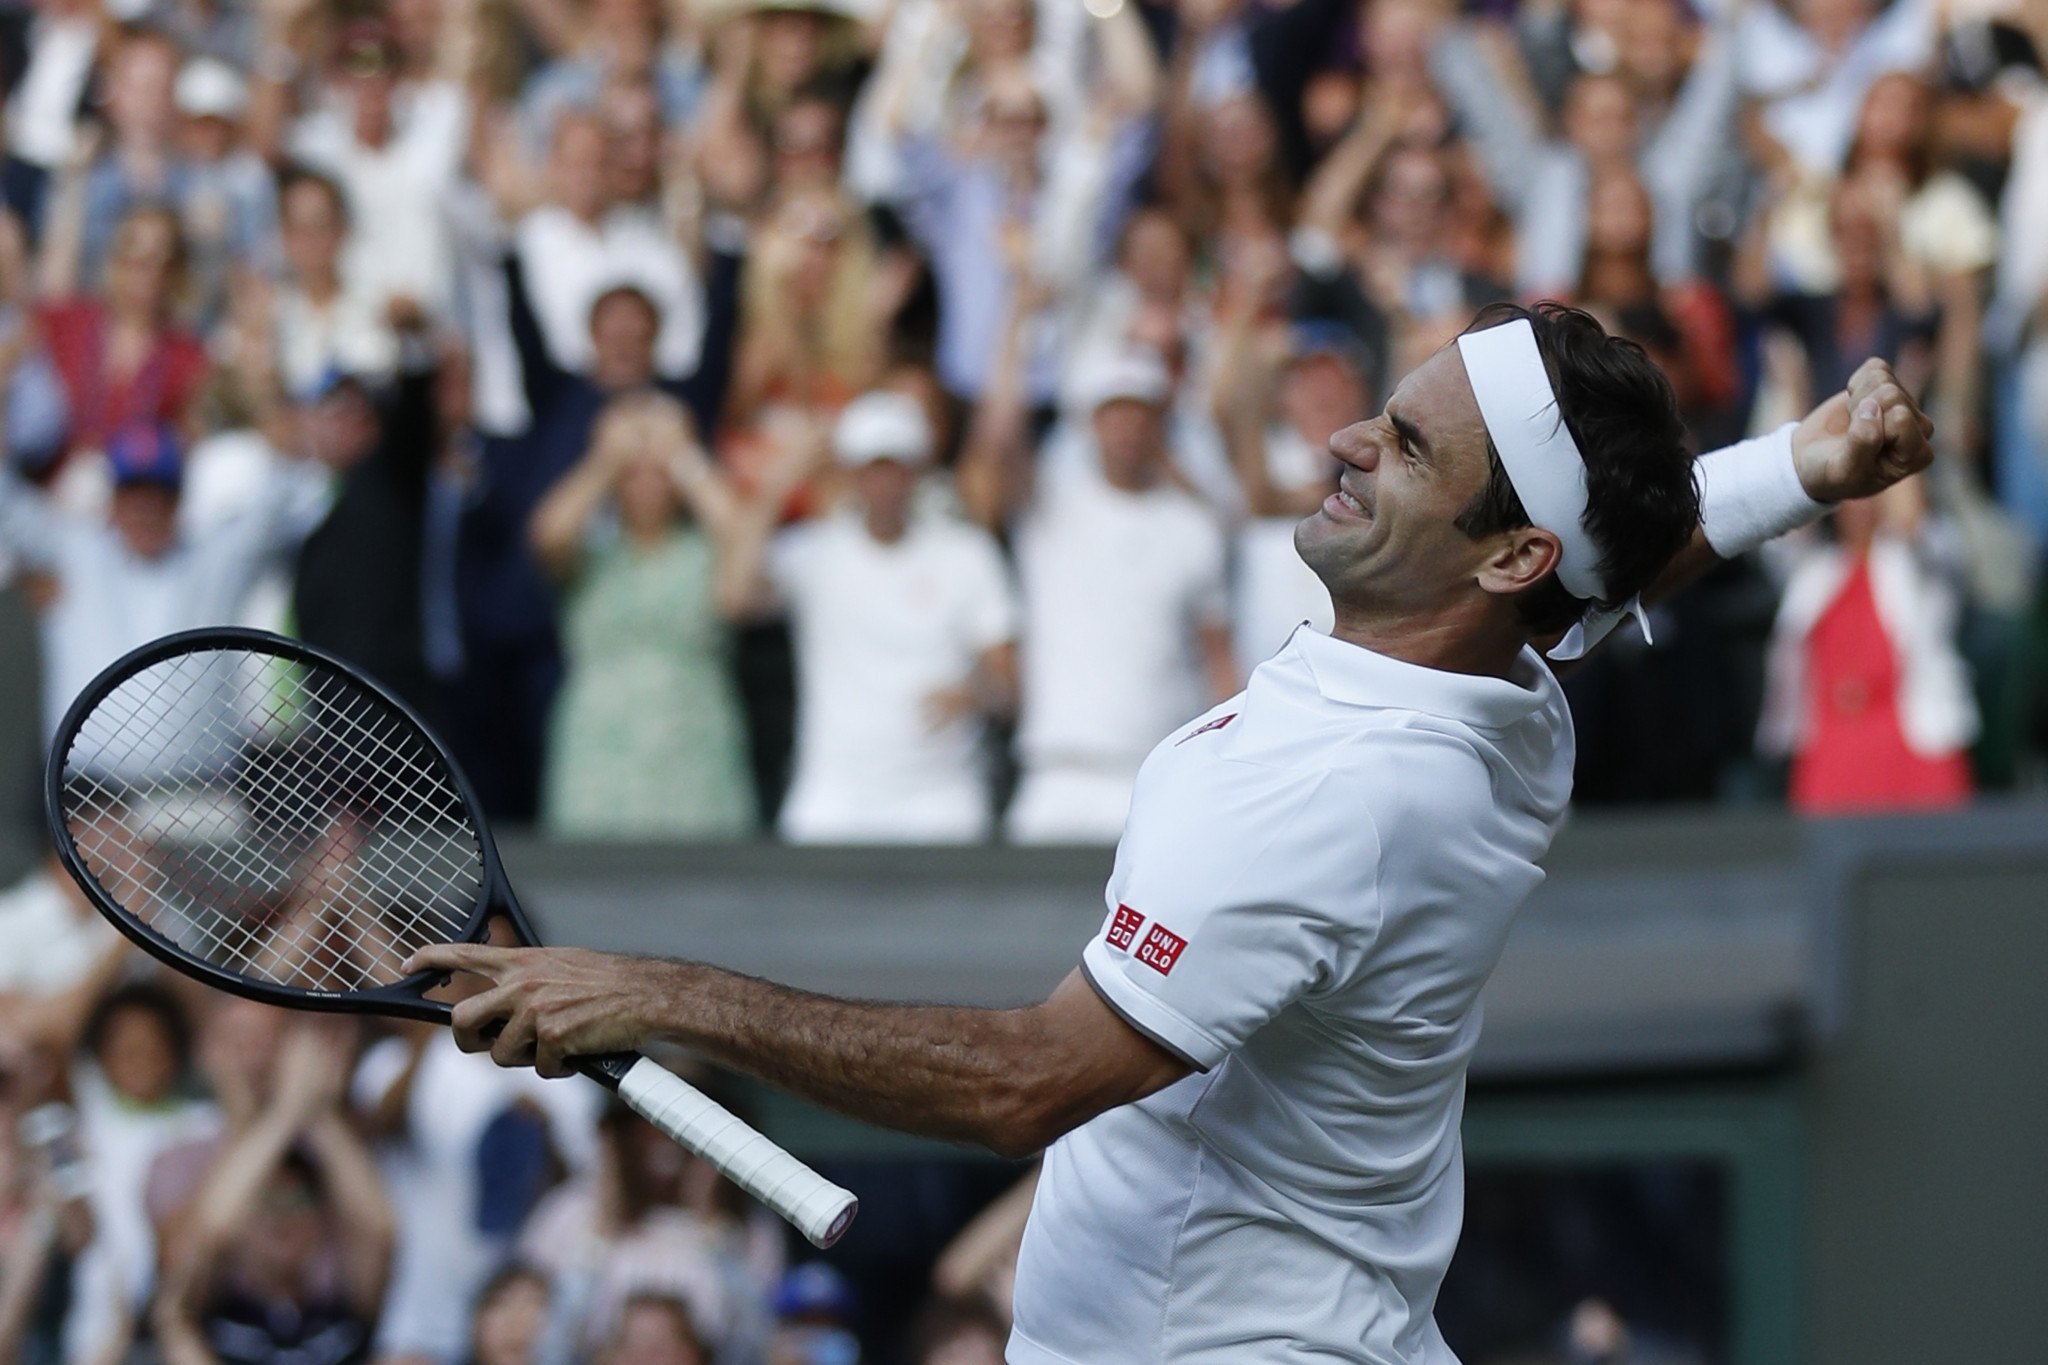 Federer beats Nadal to set up meeting with Djokovic in men's singles final at Wimbledon